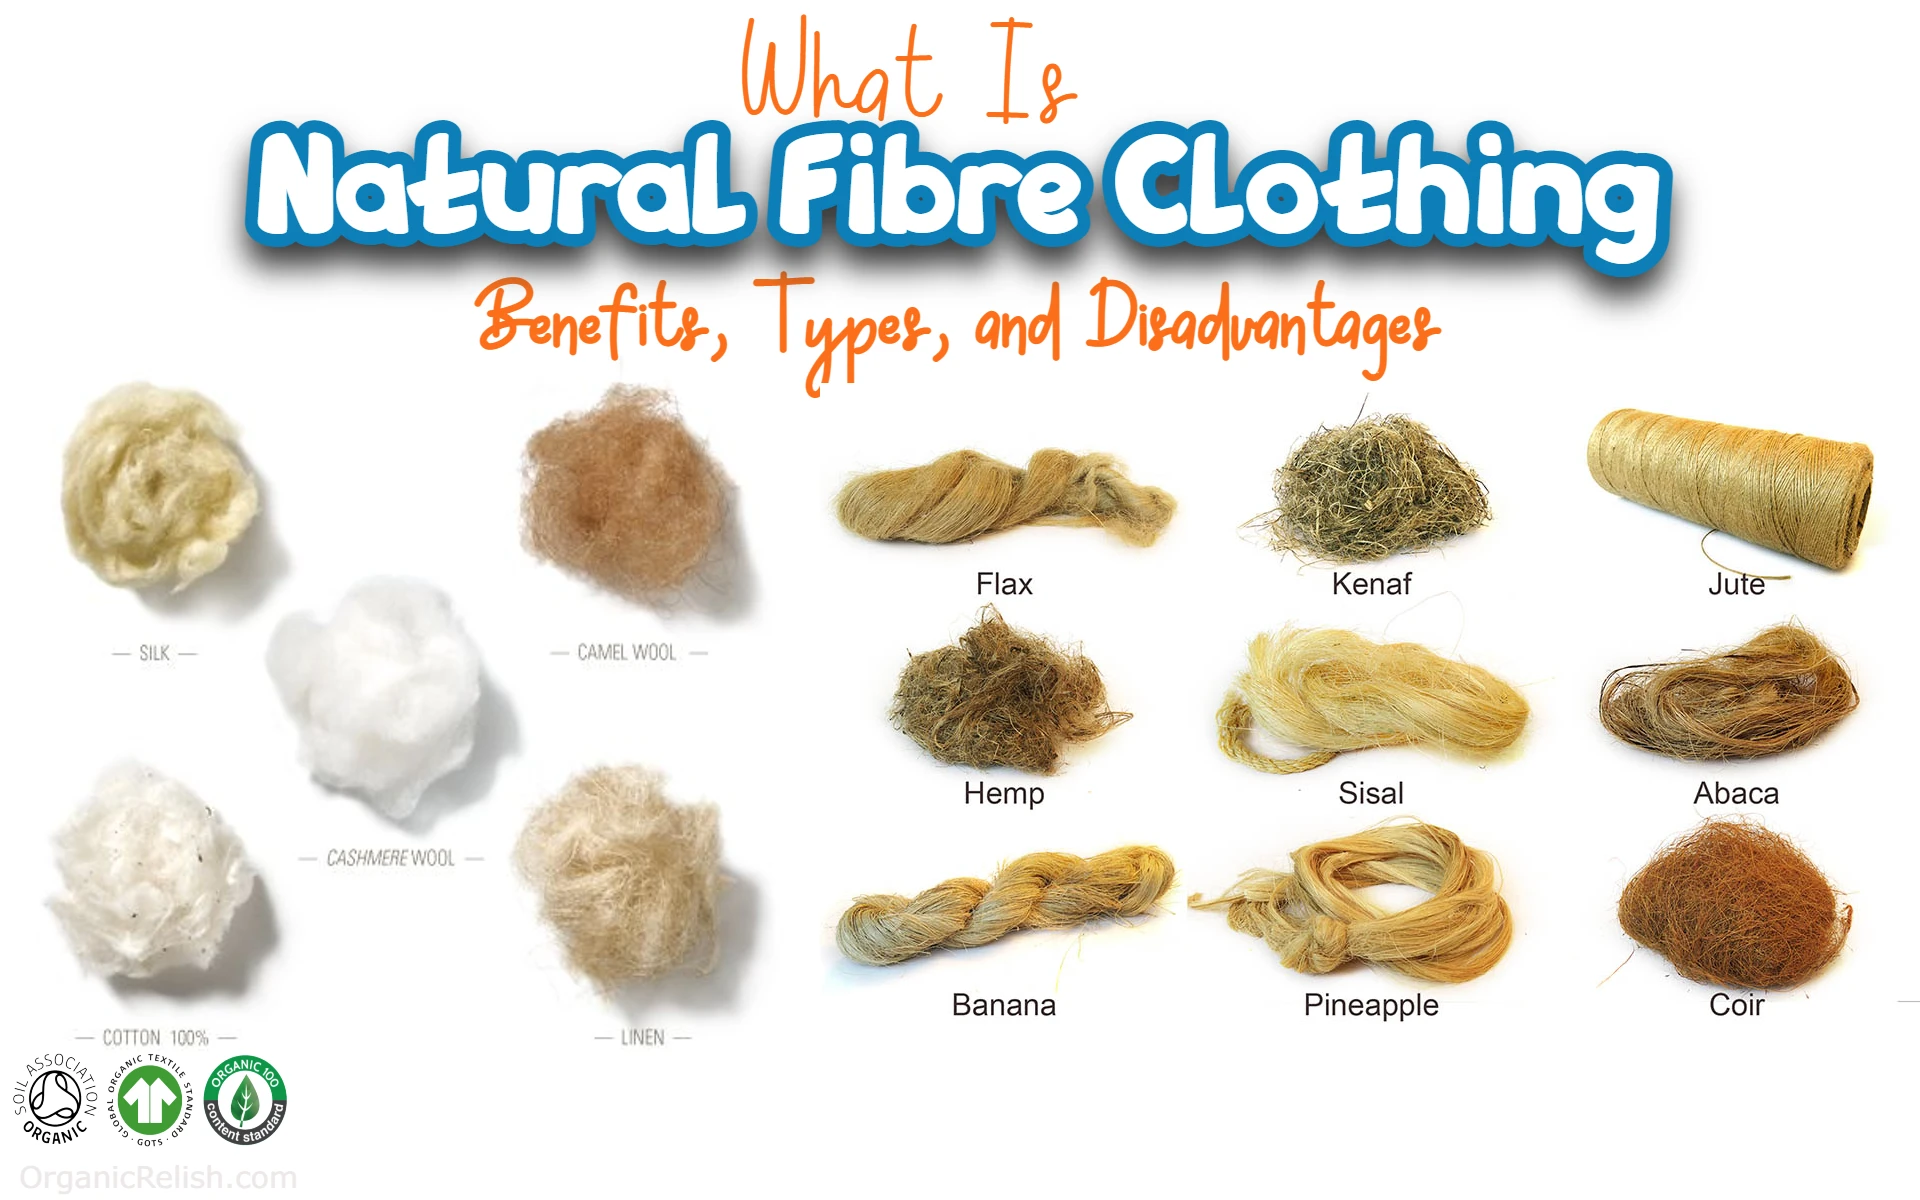 Definition of Natural Fibre Clothing